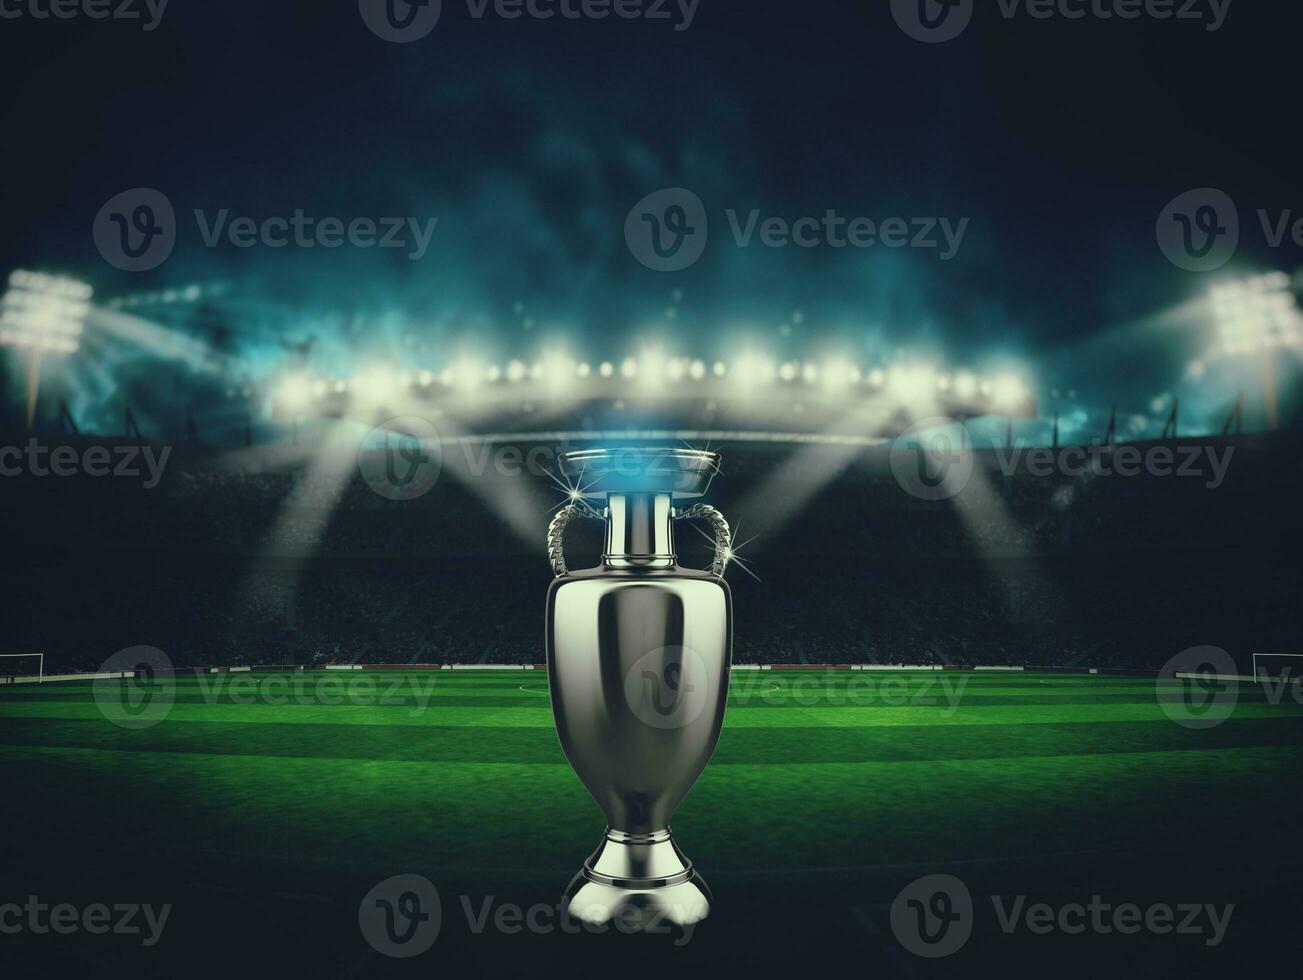 Soccer stadium with no players anda the trophy for winners. 3D Rendering photo